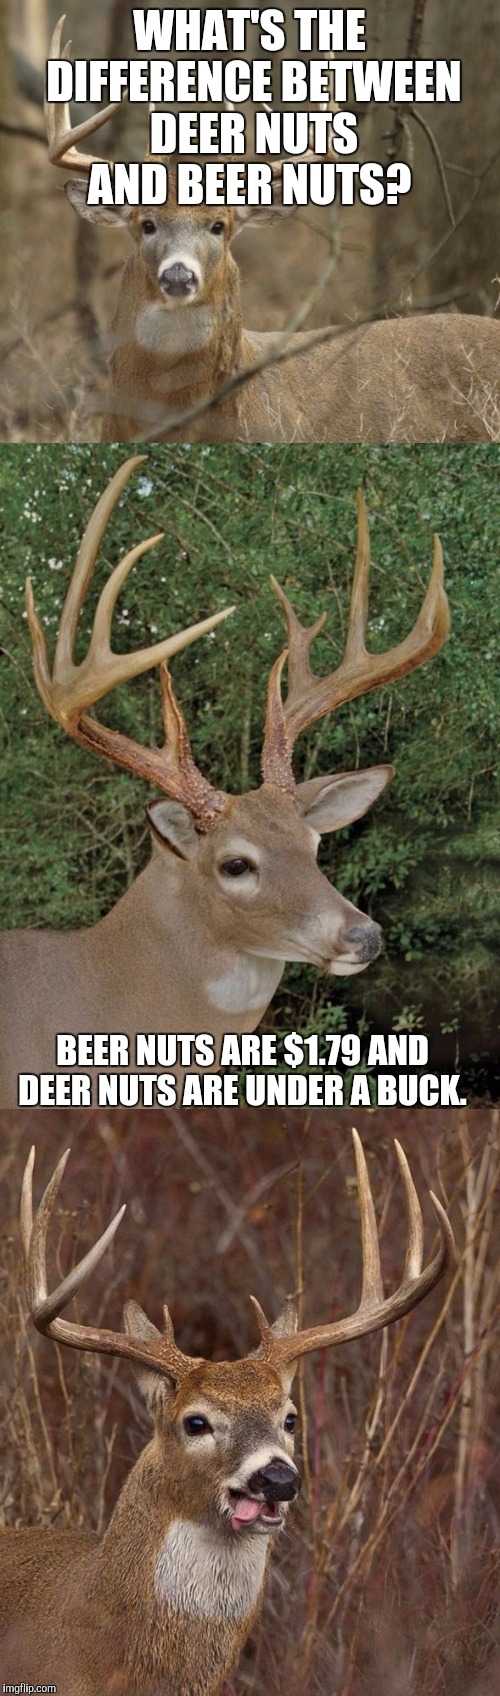 Bad Pun Buck | WHAT'S THE DIFFERENCE BETWEEN DEER NUTS AND BEER NUTS? BEER NUTS ARE $1.79 AND DEER NUTS ARE UNDER A BUCK. | image tagged in bad pun buck | made w/ Imgflip meme maker